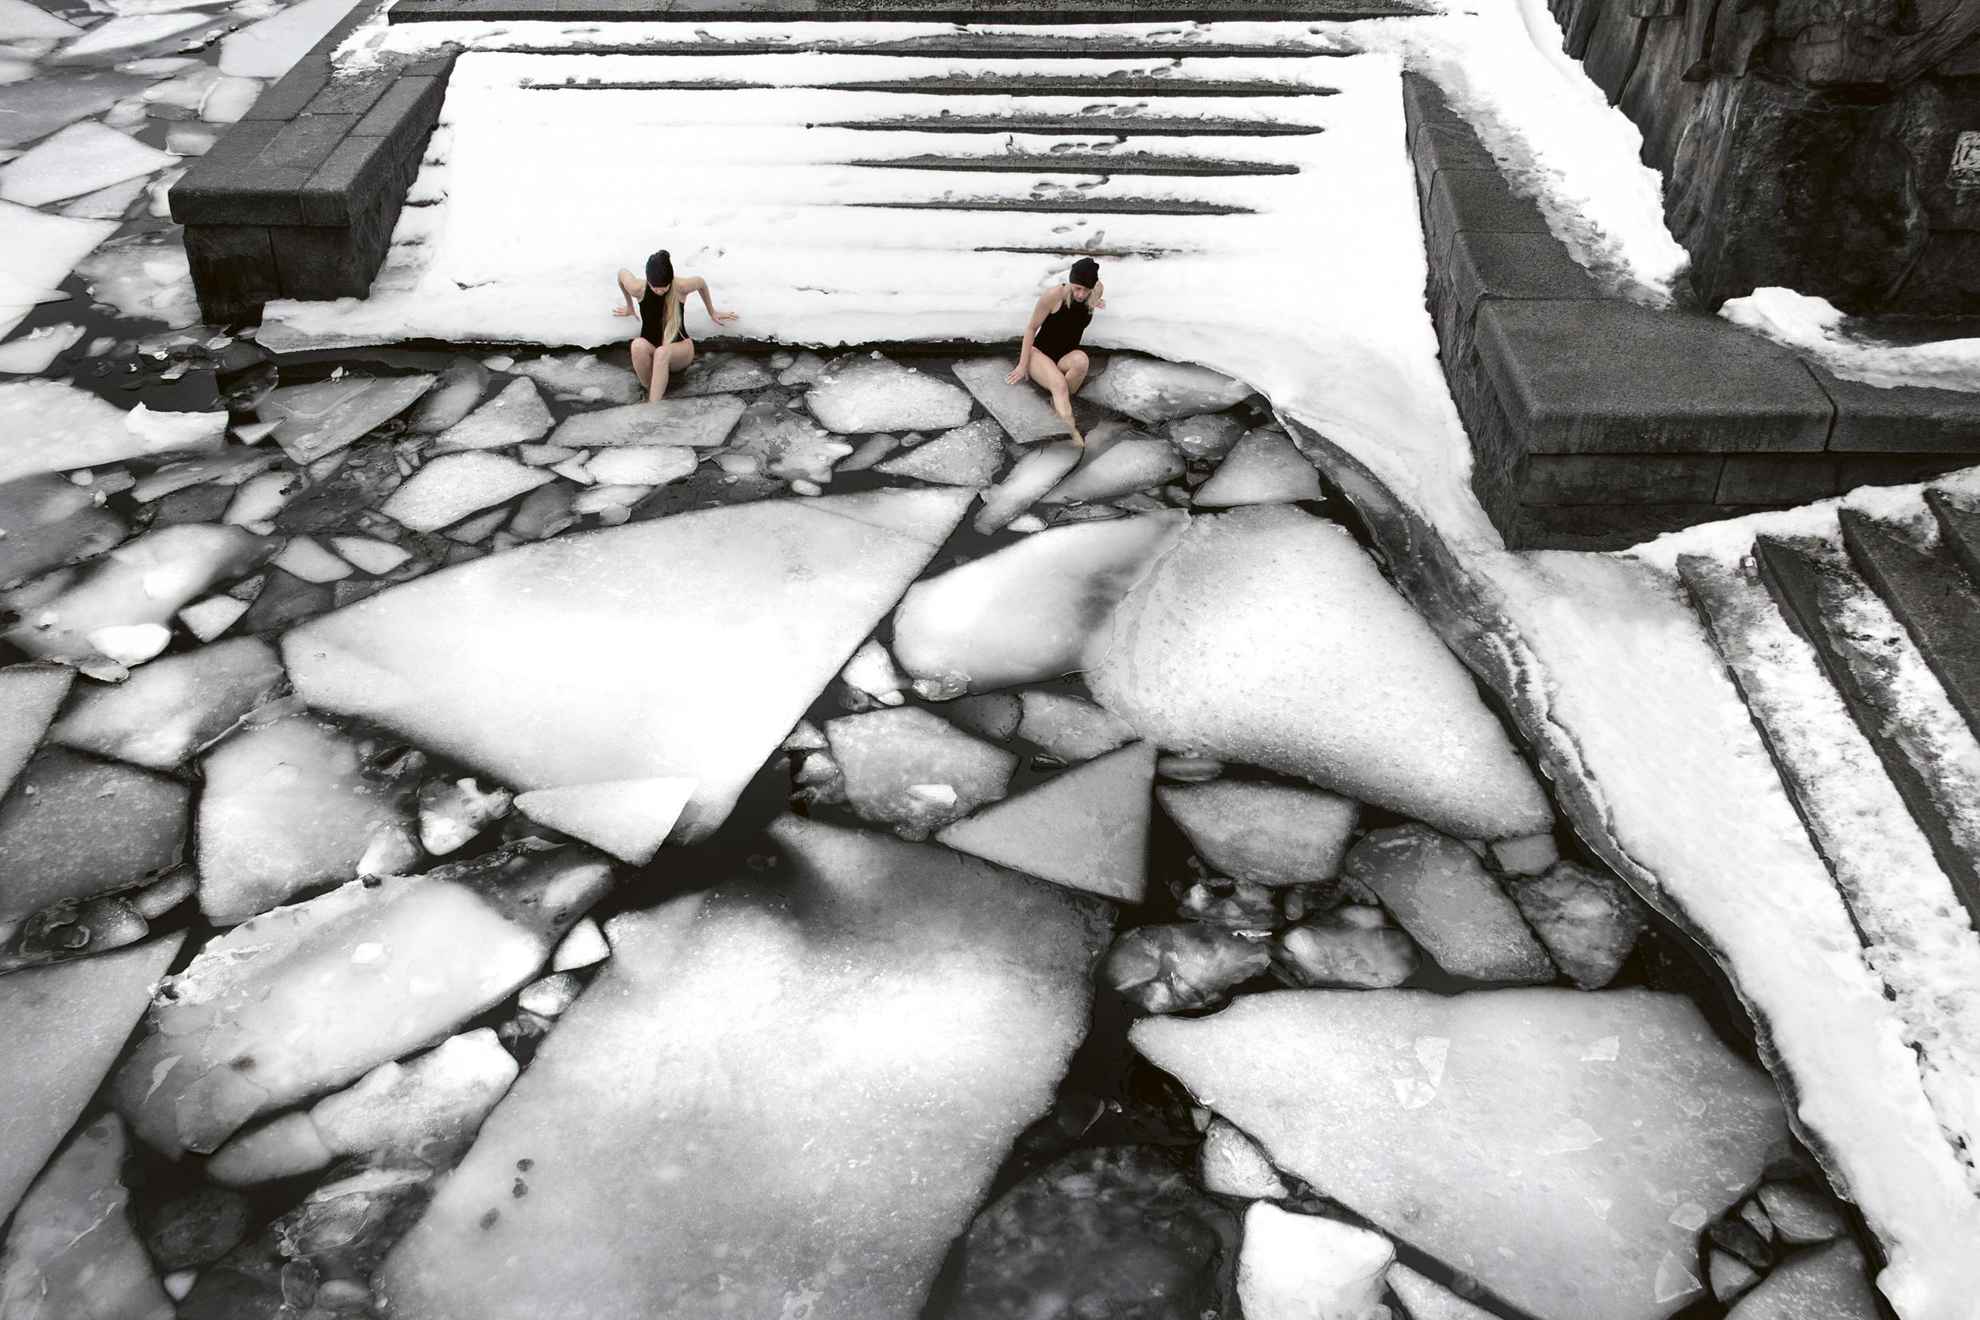 Two women on their way to take a winter bath from a jetty with stairs down to the shore. There are ice floes in the water.